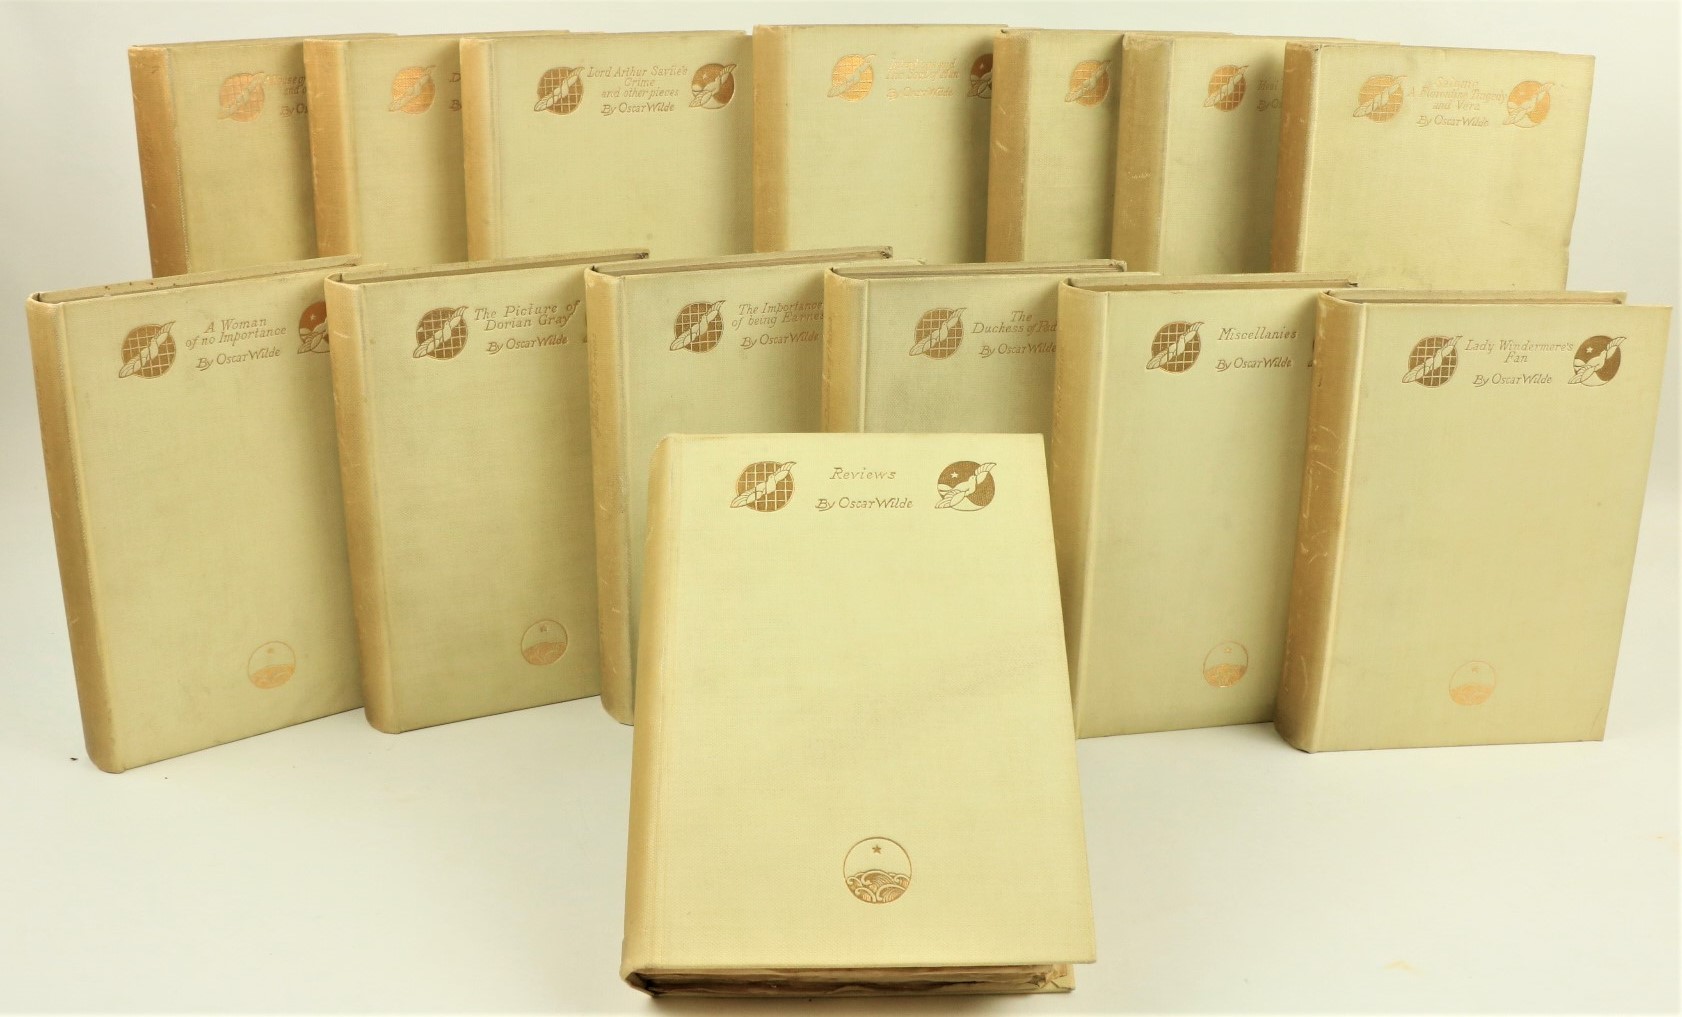 Limited Edition on Handmade Paper - 1000 Copies Only  Wilde (Oscar) Collected Works, 14 vols. roy